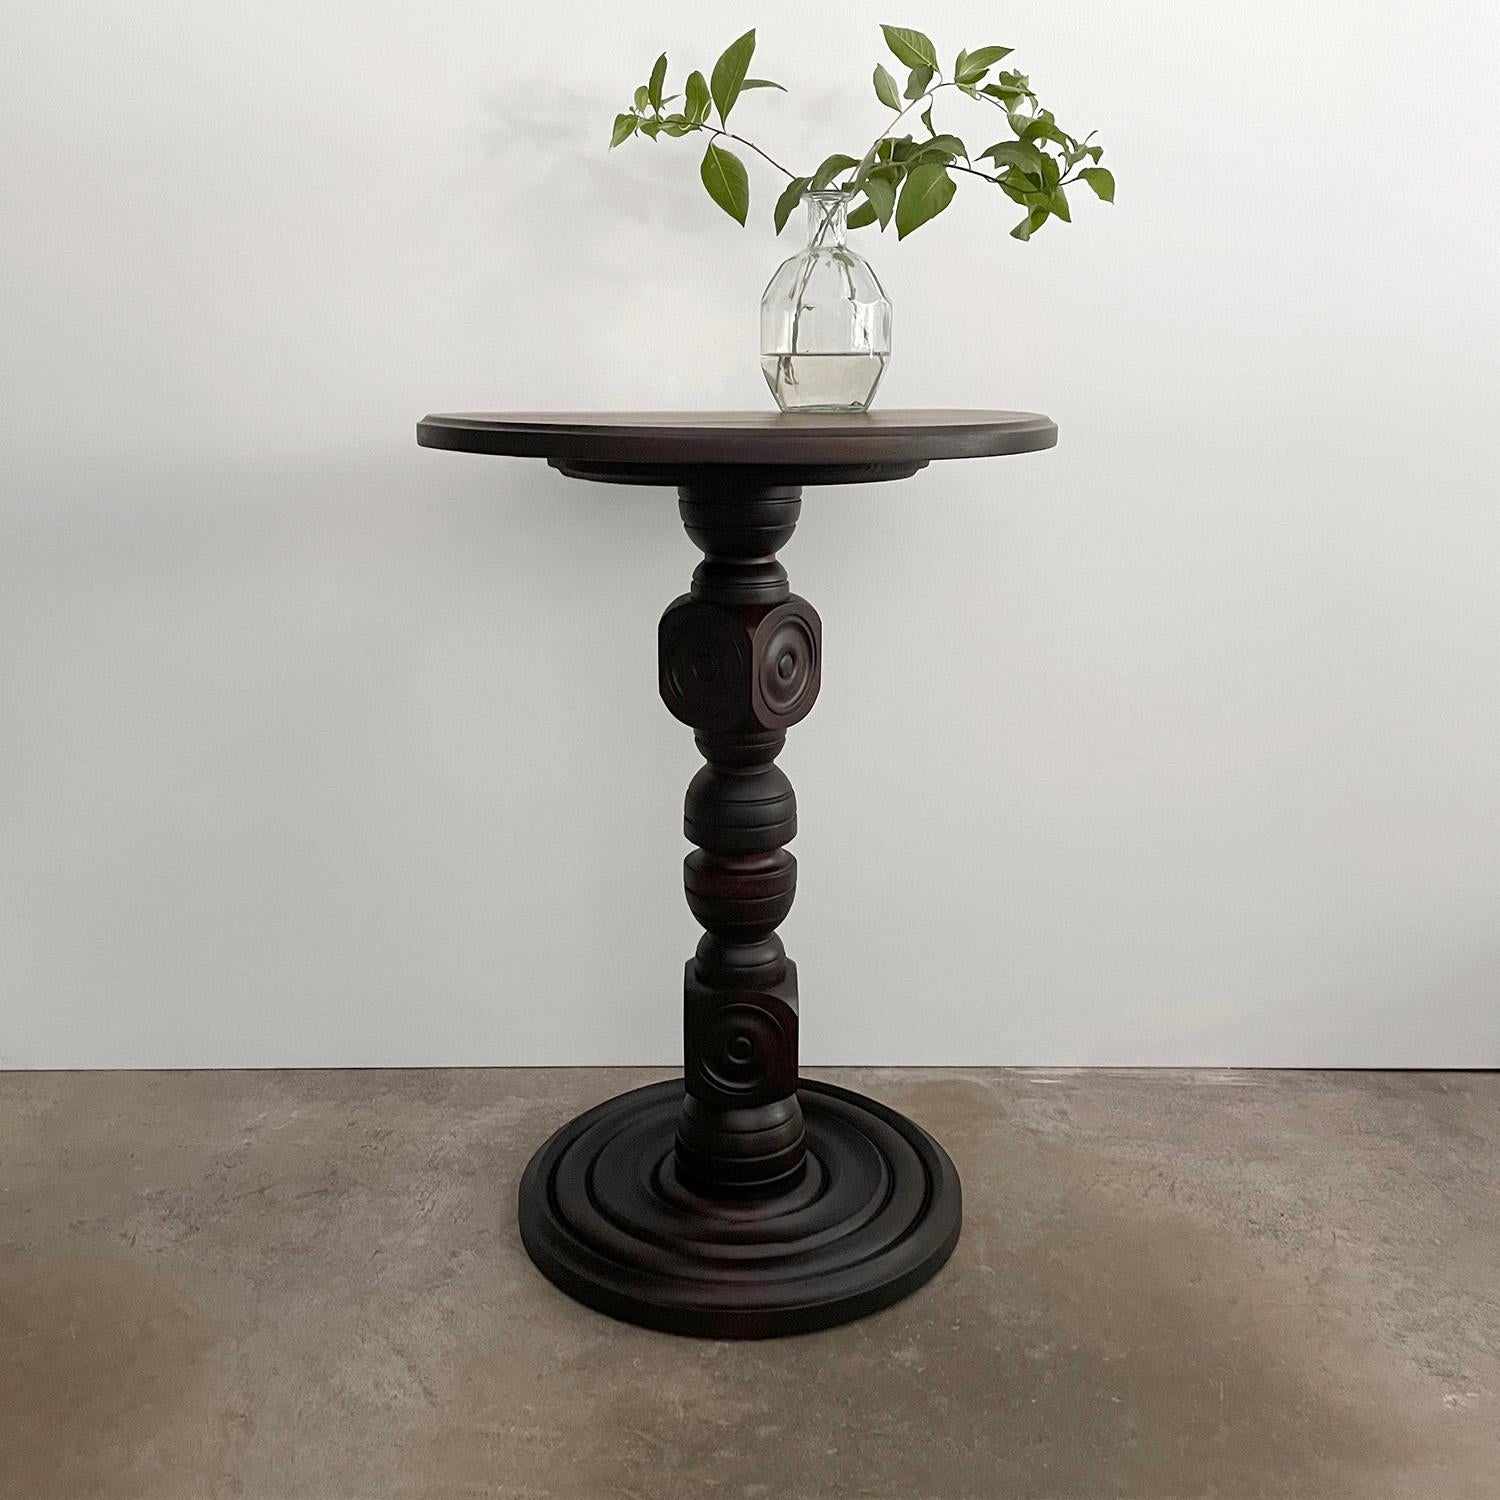 Charles Dudouyt carved oak table
France, 1940s
Handcrafted artisanal piece 
Beautifully sculpted carved oak pedestal 
Carved concentric circle detailing on the turned wood base
Natural color variations throughout 
Light surface markings 
Patina from